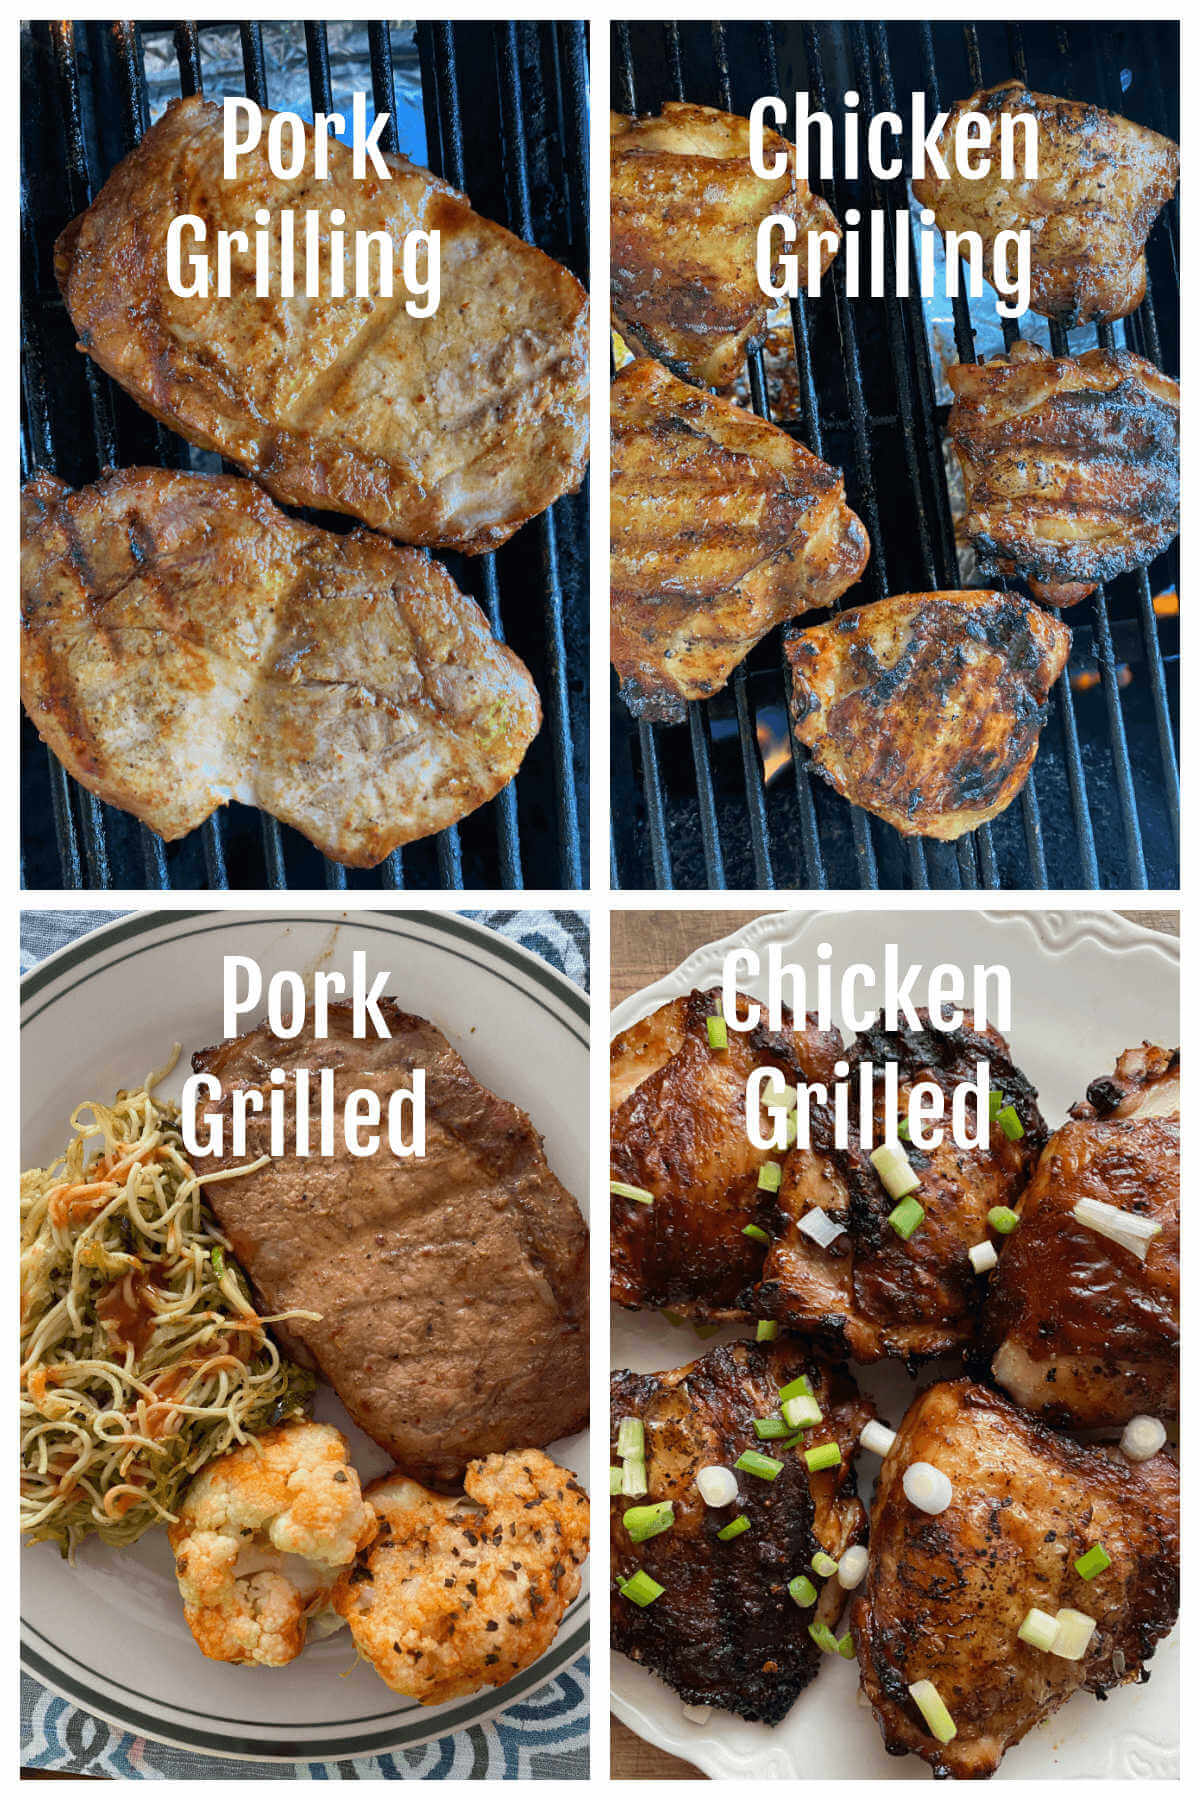 Collage of pork and chicken on grill and then finished.